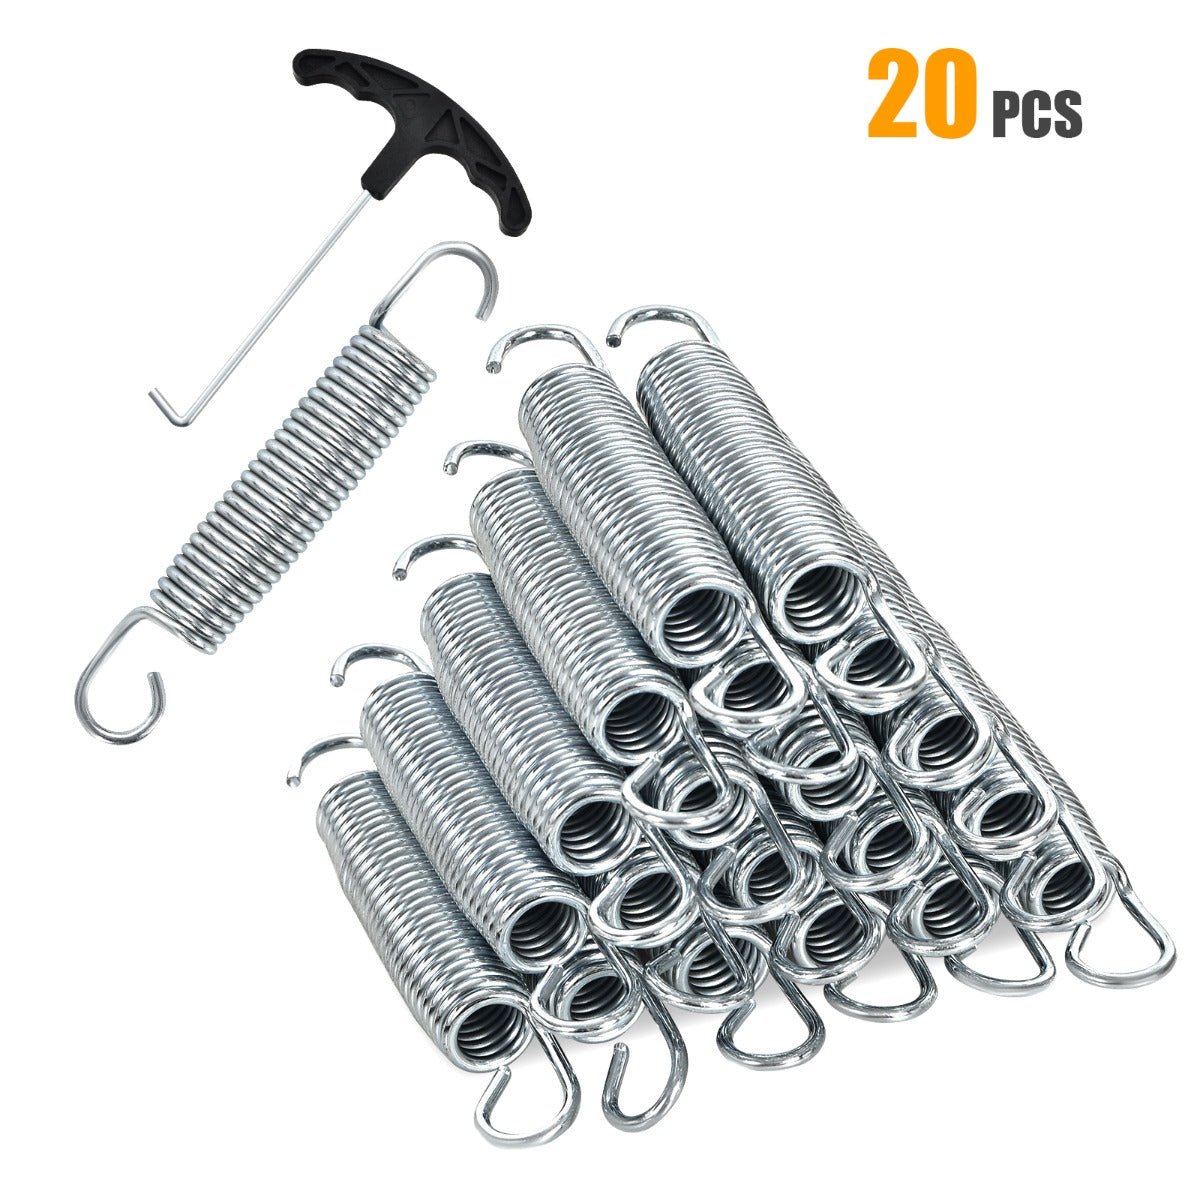 Trampoline Spring Replacement: 20 Pack Heavy Duty Springs with T-Hook Pull Tool